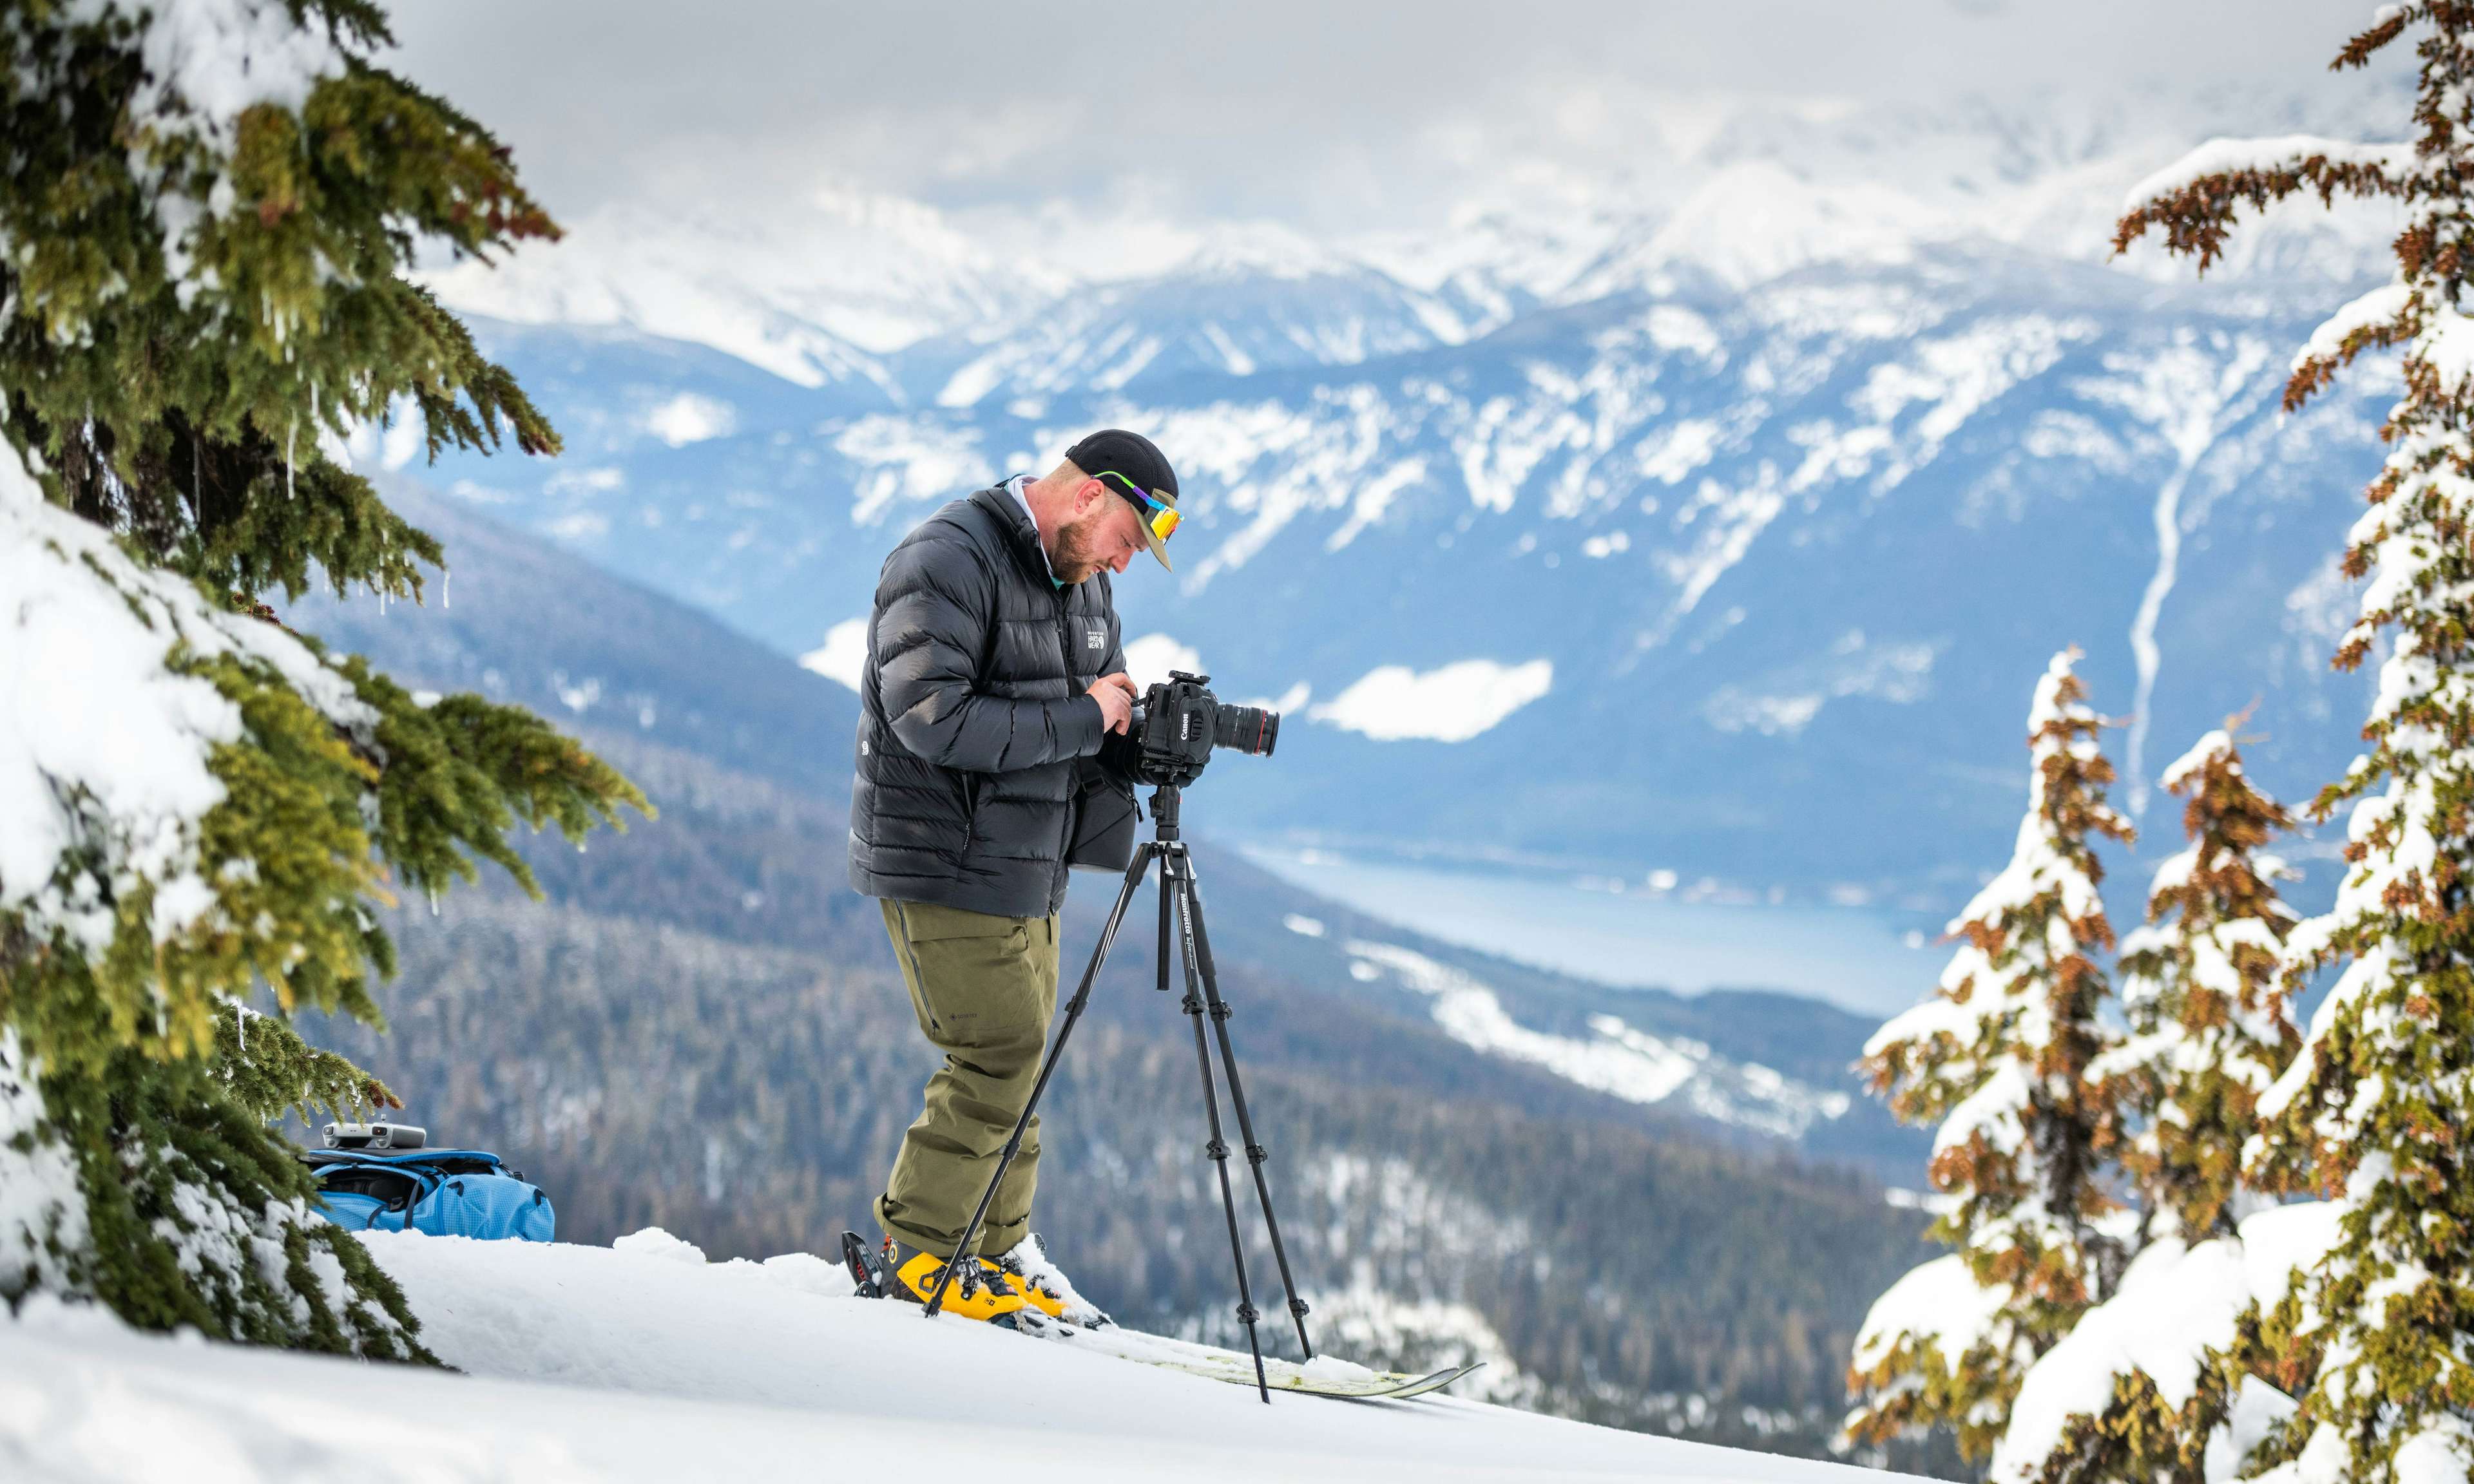 Filmmaker Ryan Collins with a camera in snowy landscape with mountains and lake behind